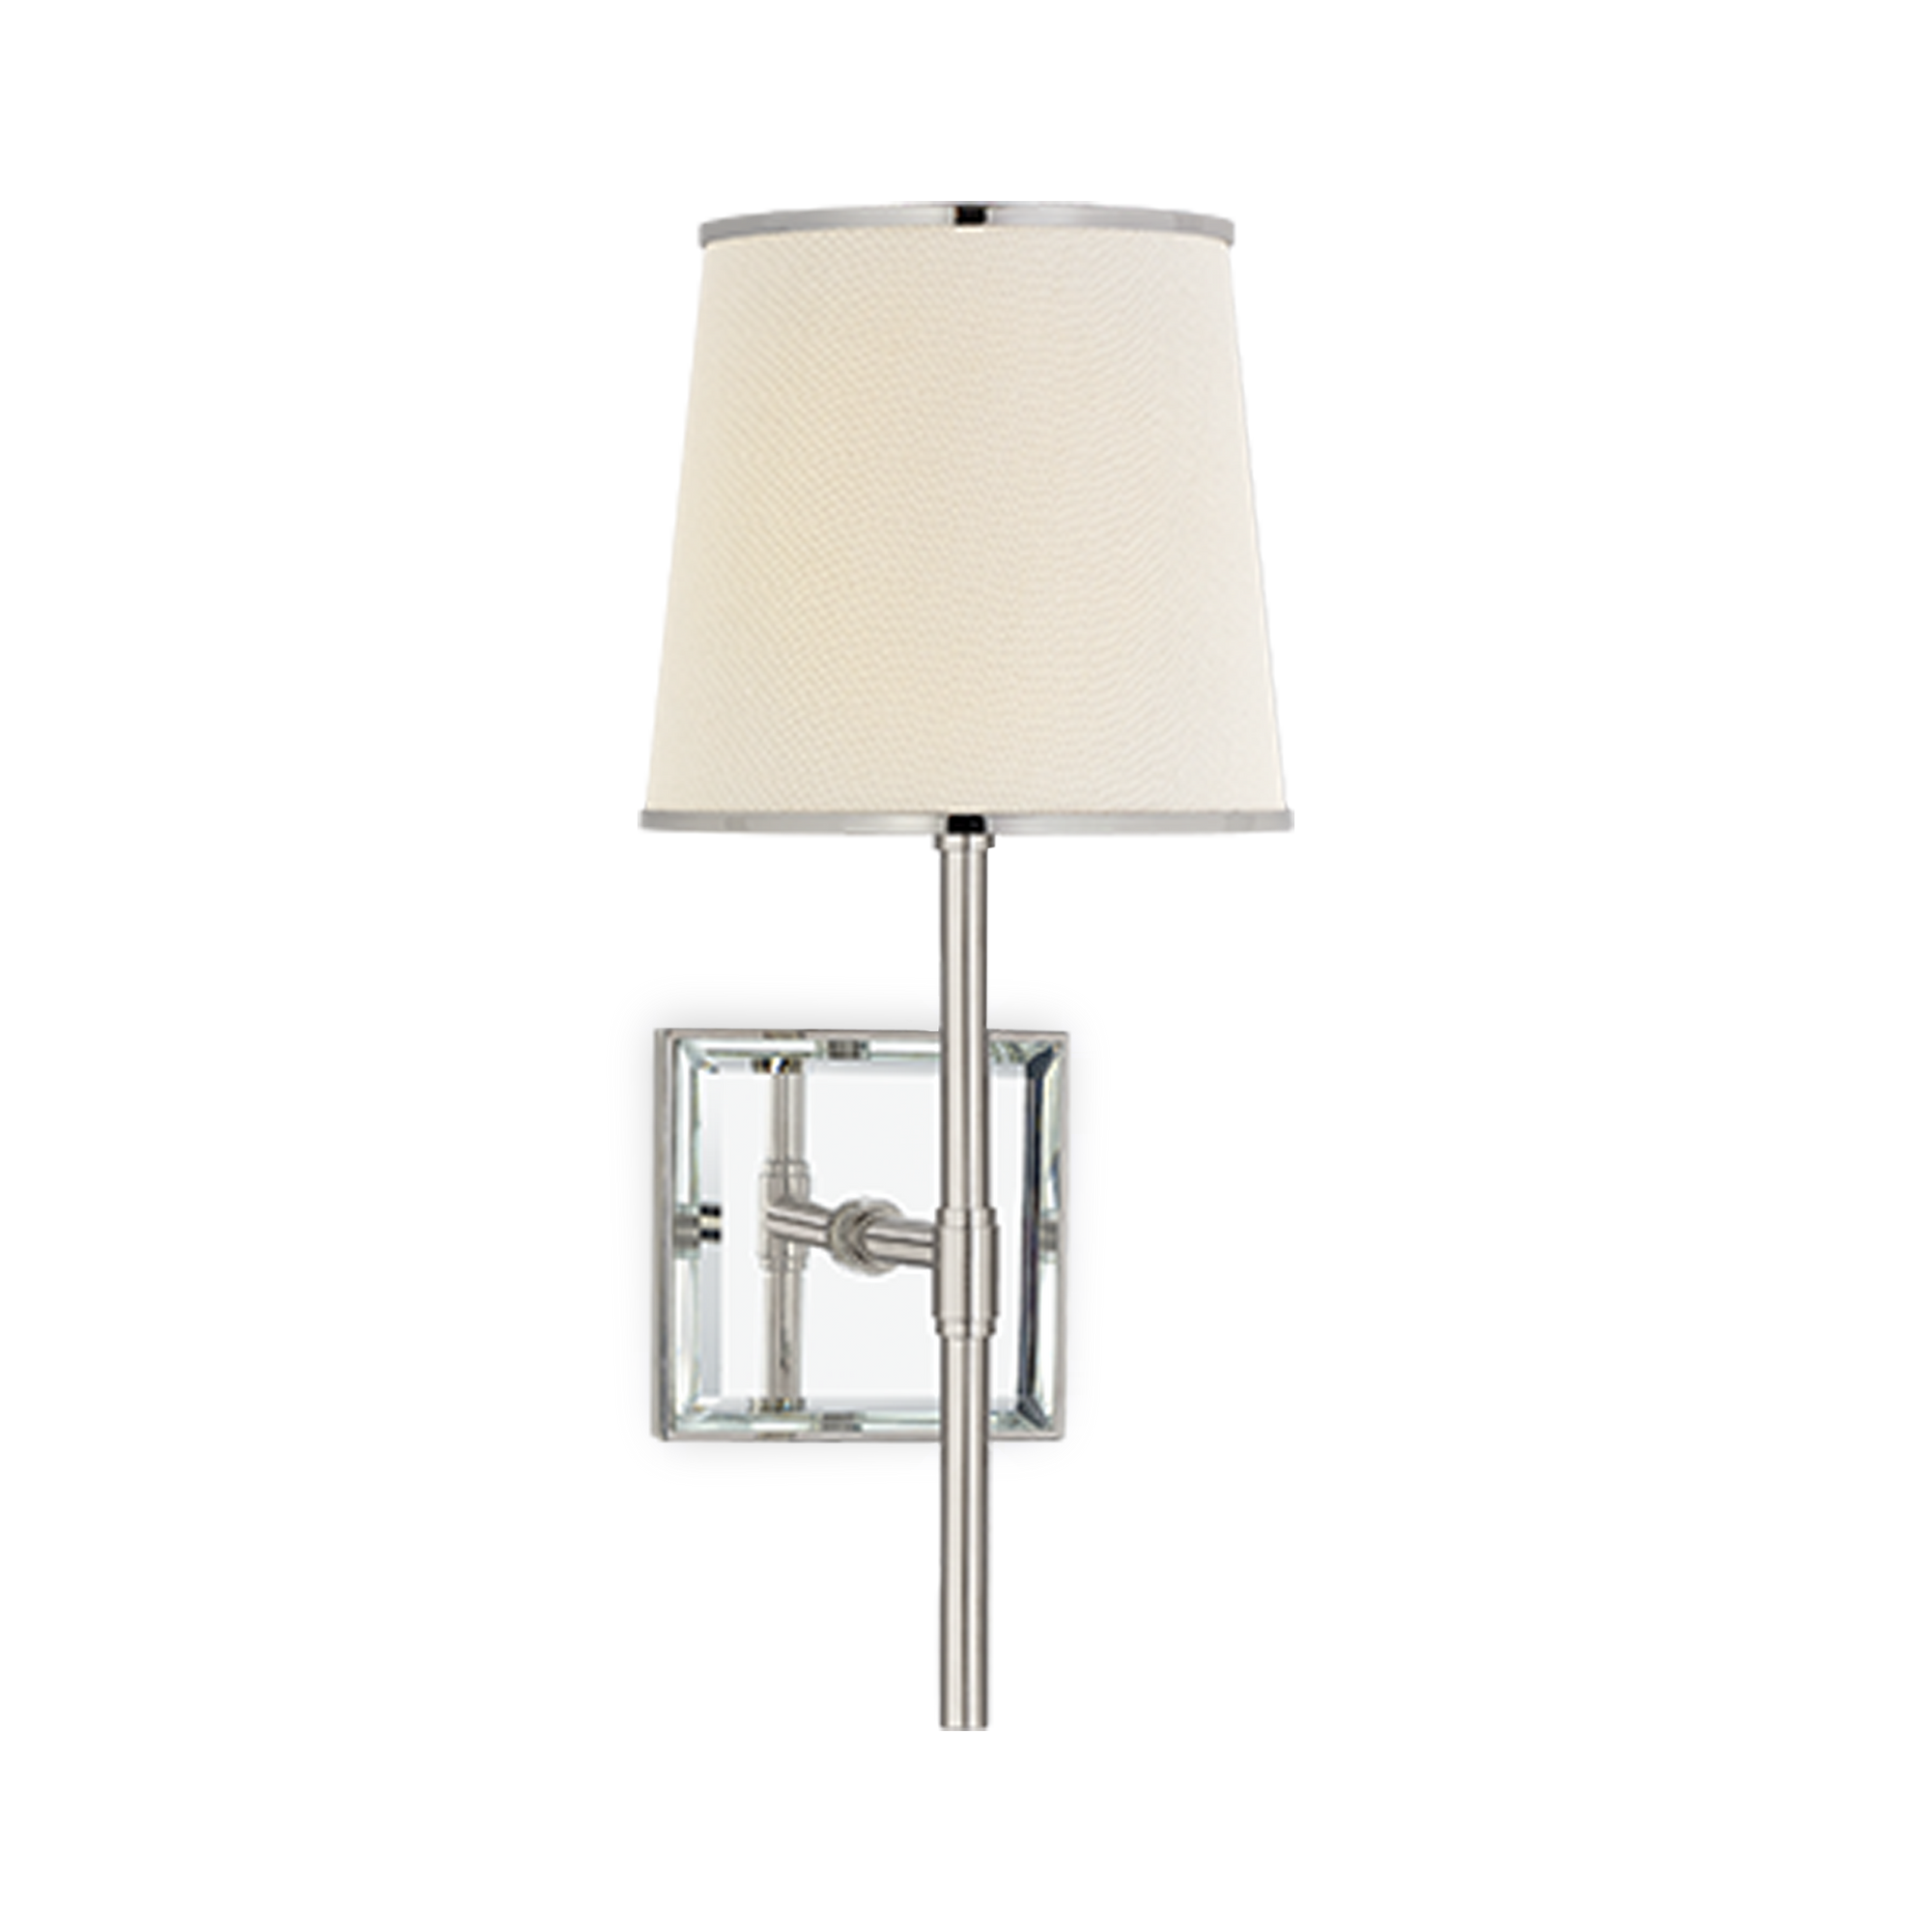 The Bradford Wall Light was designed with a mix-and-match philosophy featuring whimsical, eclectic, yet contemporary elements.